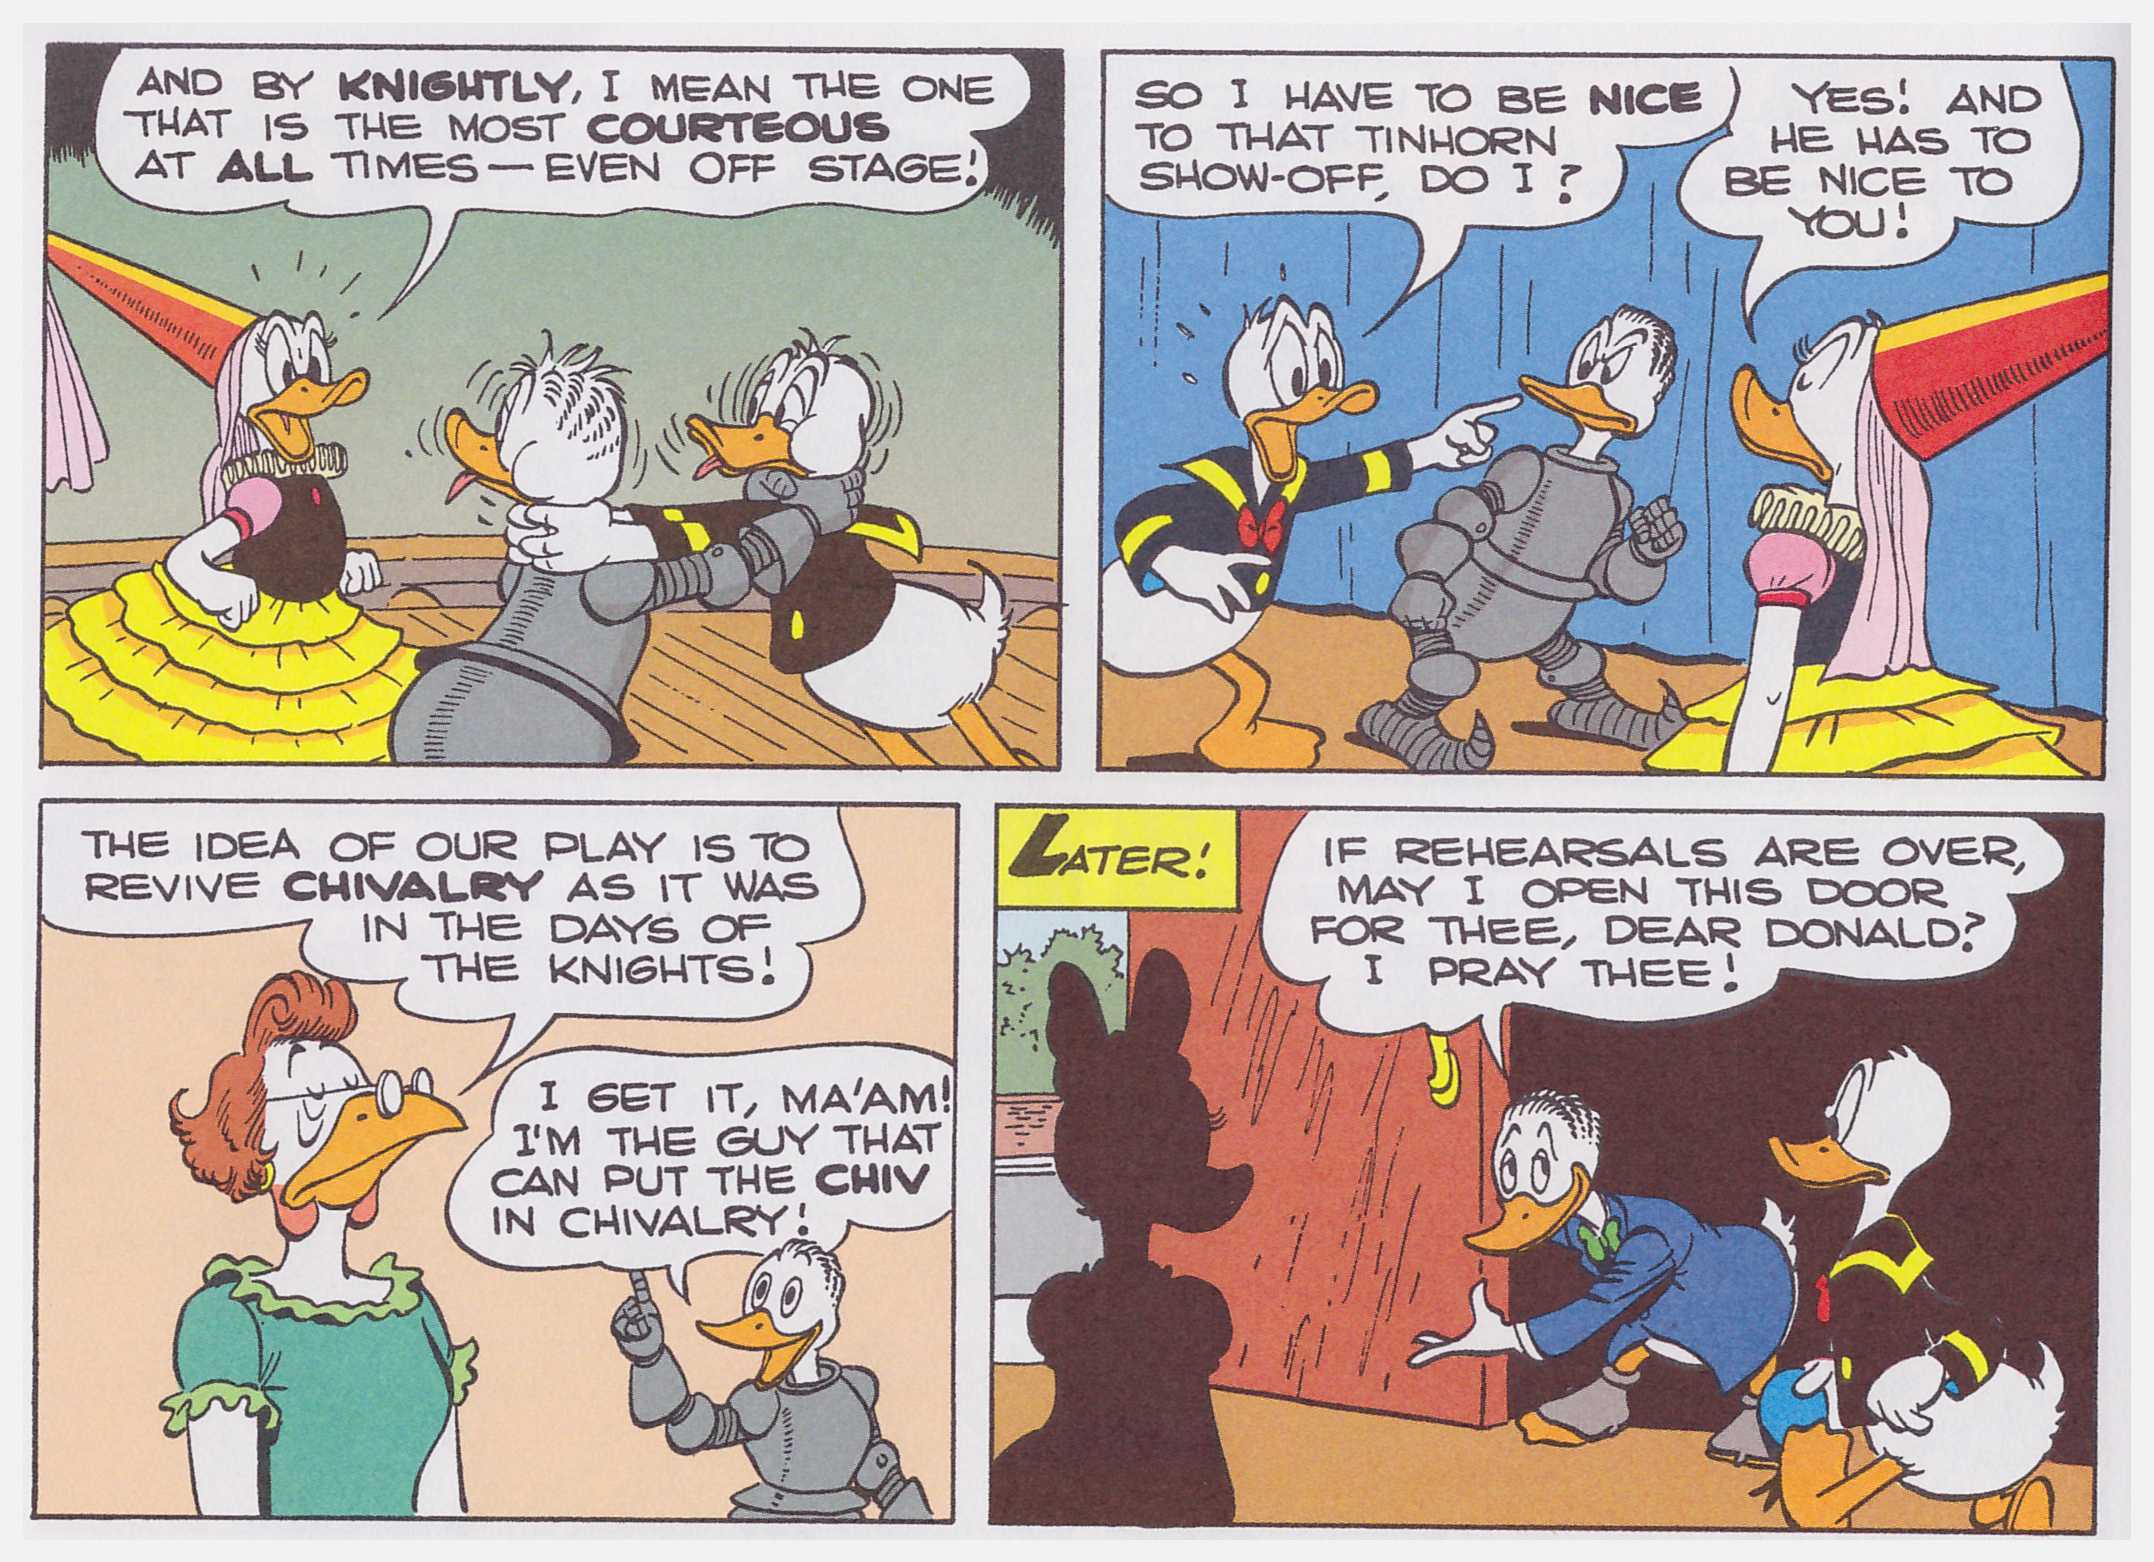 Walt Disney Comics and Stories by Carl Barks vol 18 review